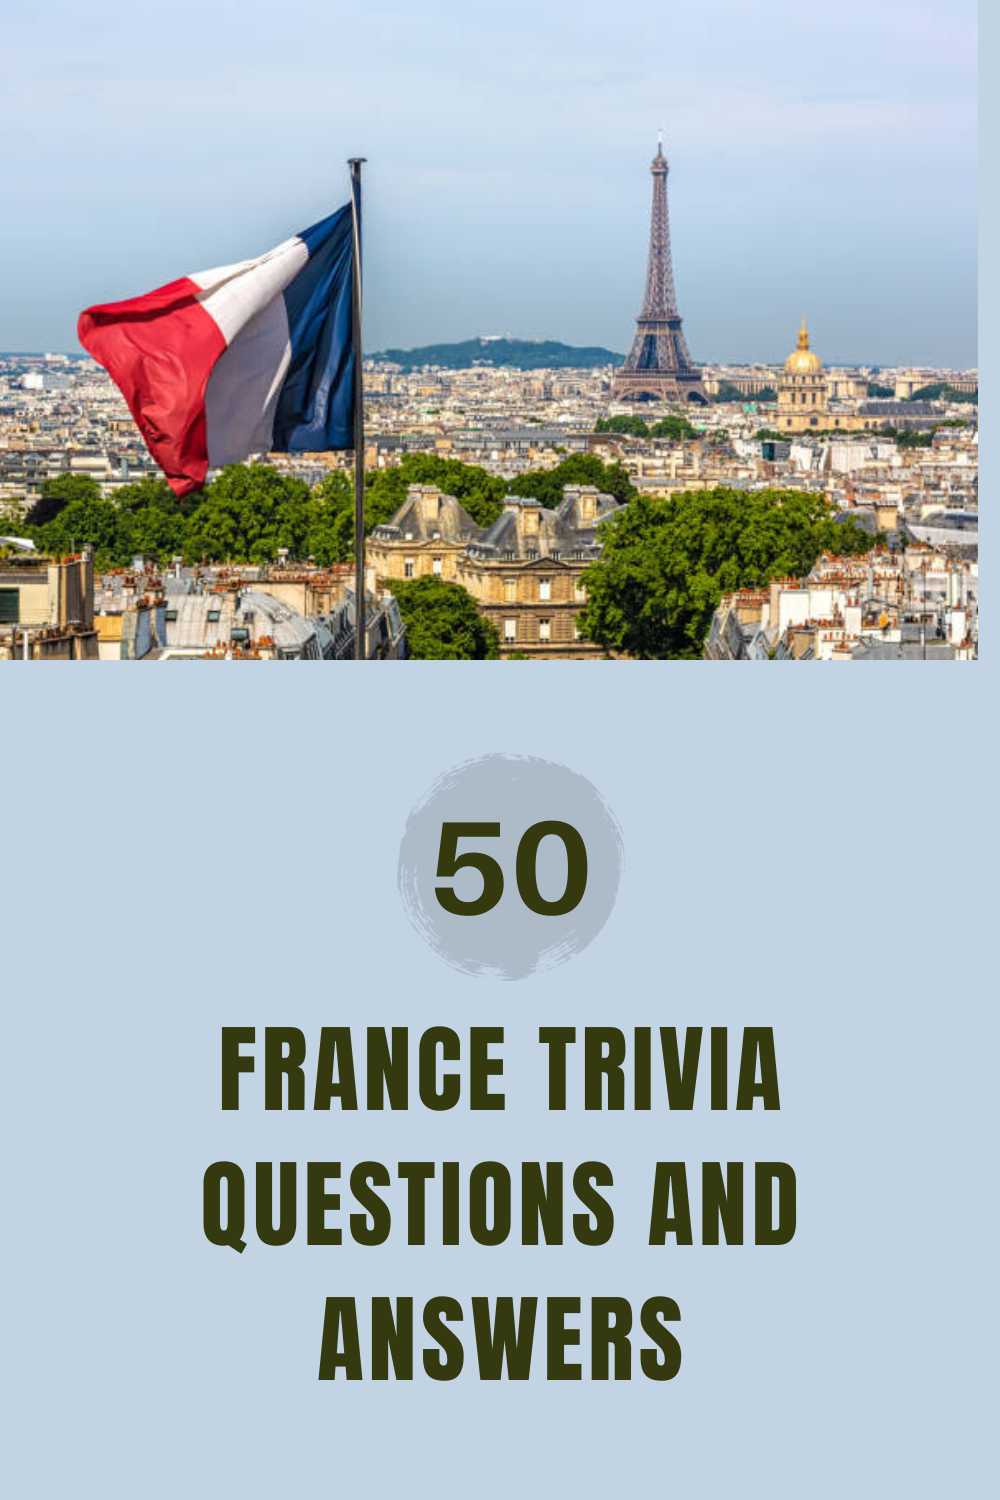 50 France Trivia Questions and Answers